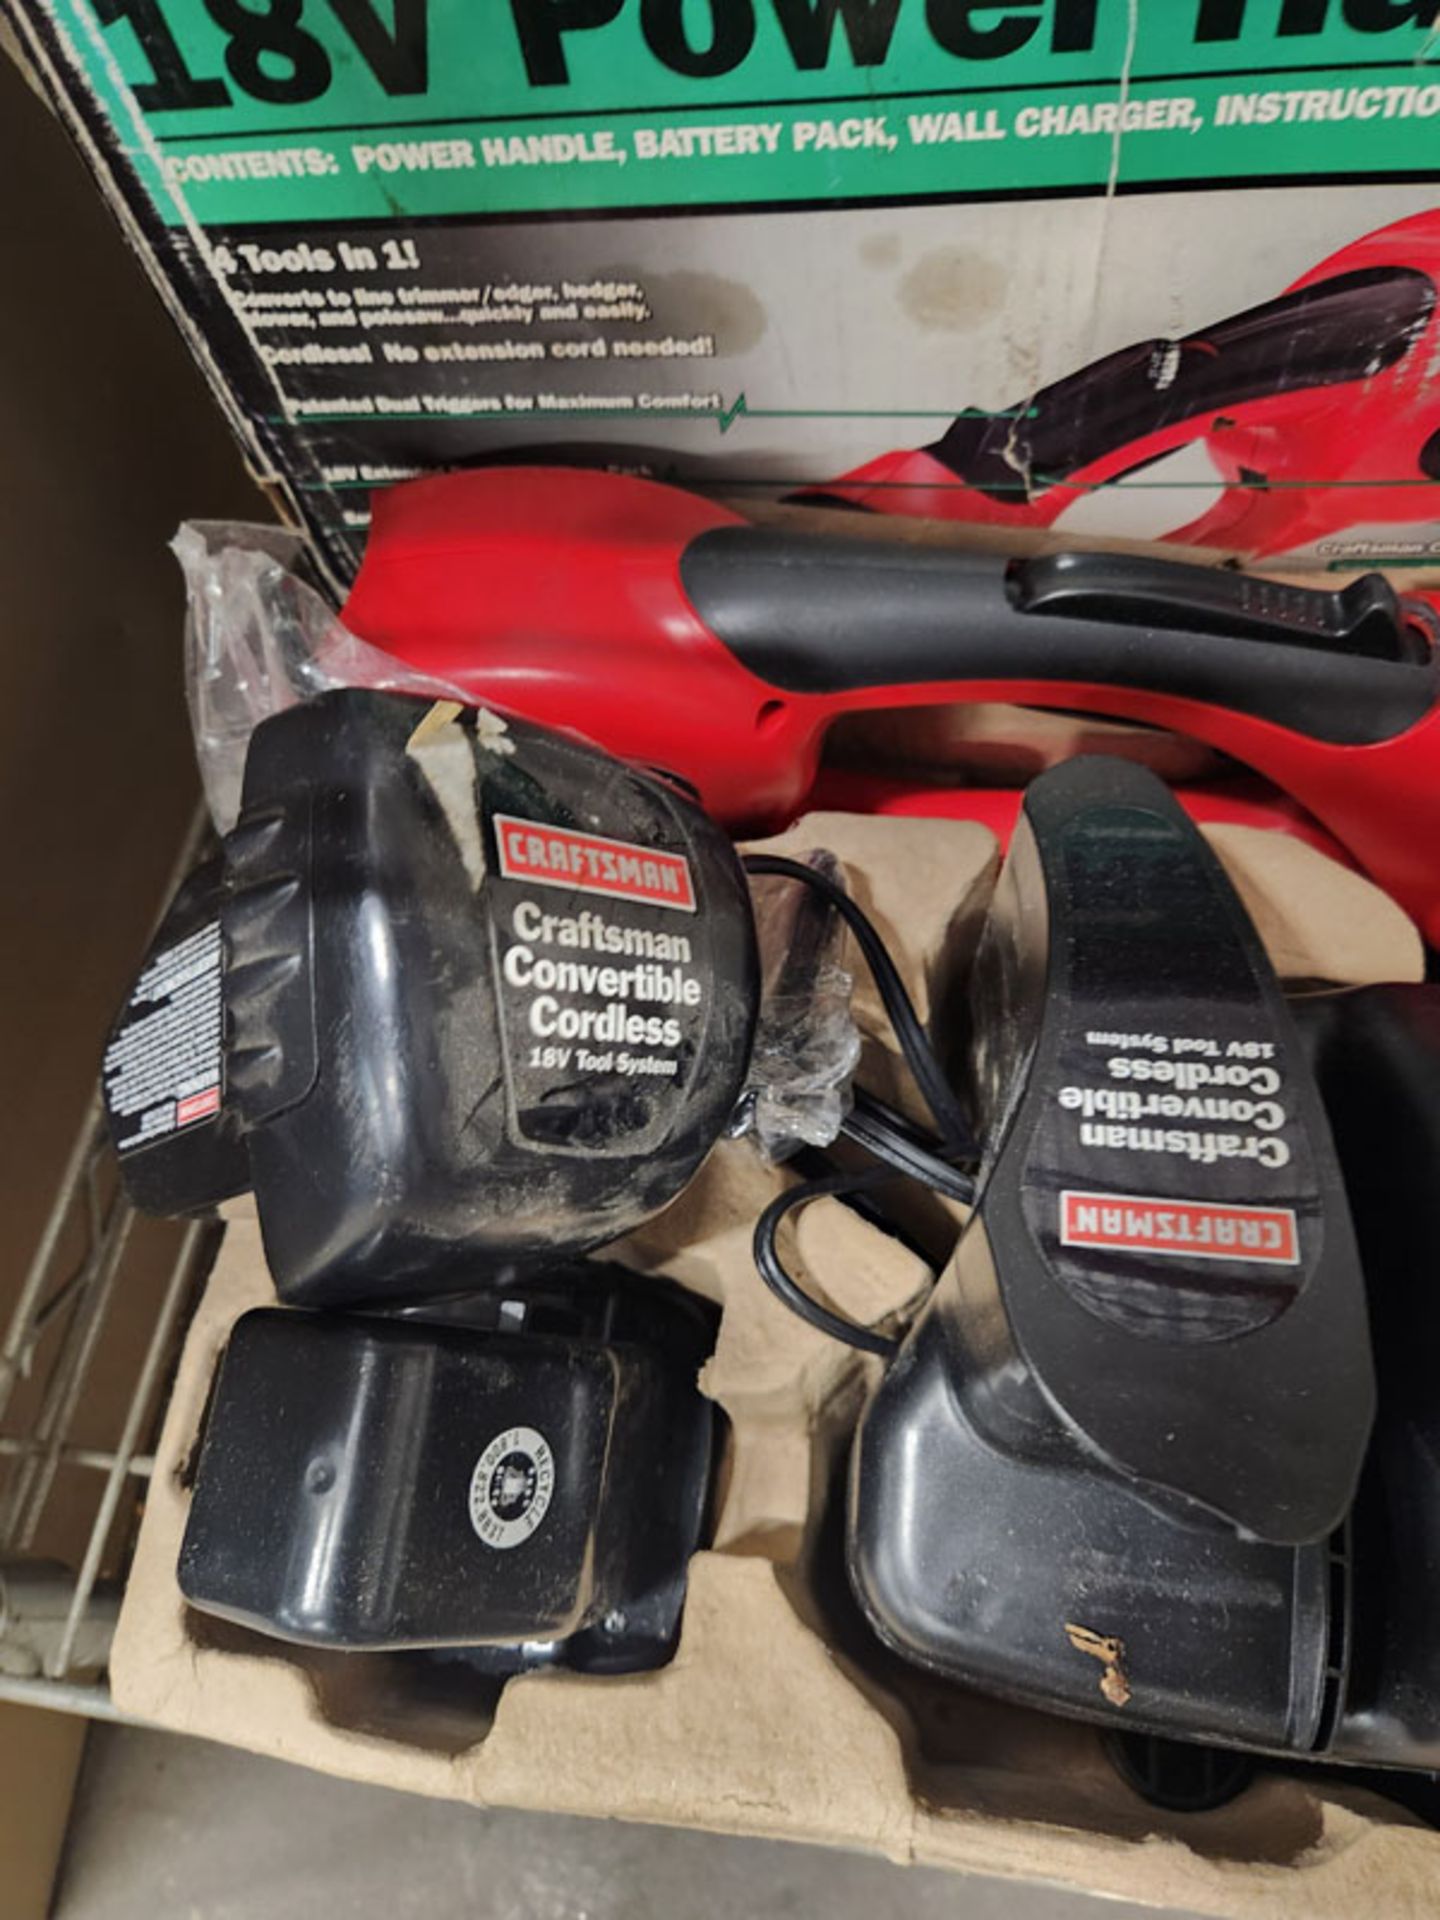 CRAFTSMAN 18V CONVERTIBLE CORDLESS 4 IN 1 POWER HANDLE WITH EXTRA BATTERIES #7174291 - Image 2 of 3